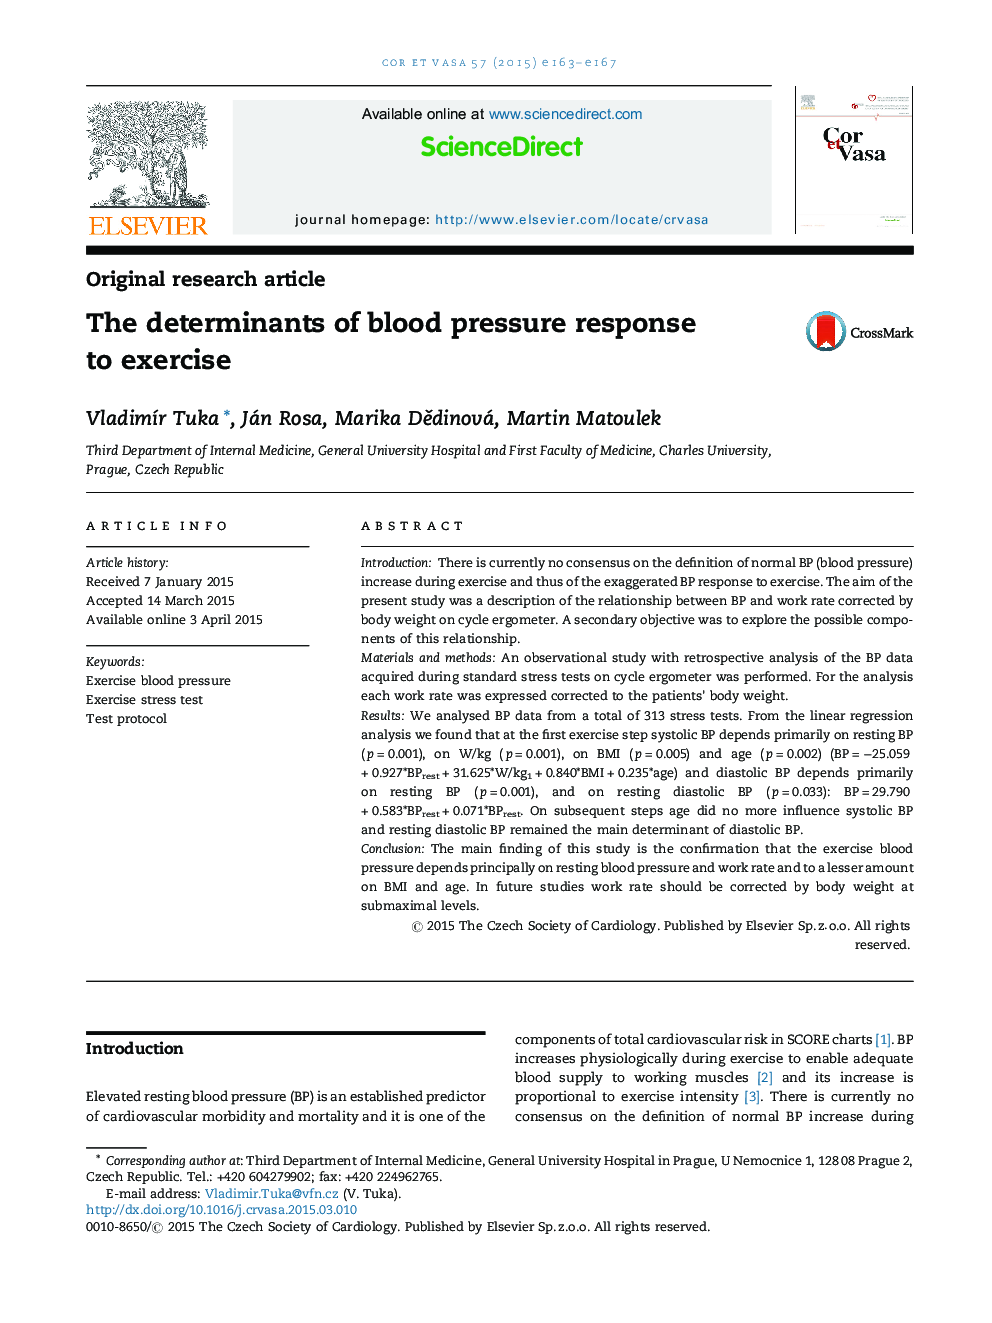 The determinants of blood pressure response to exercise